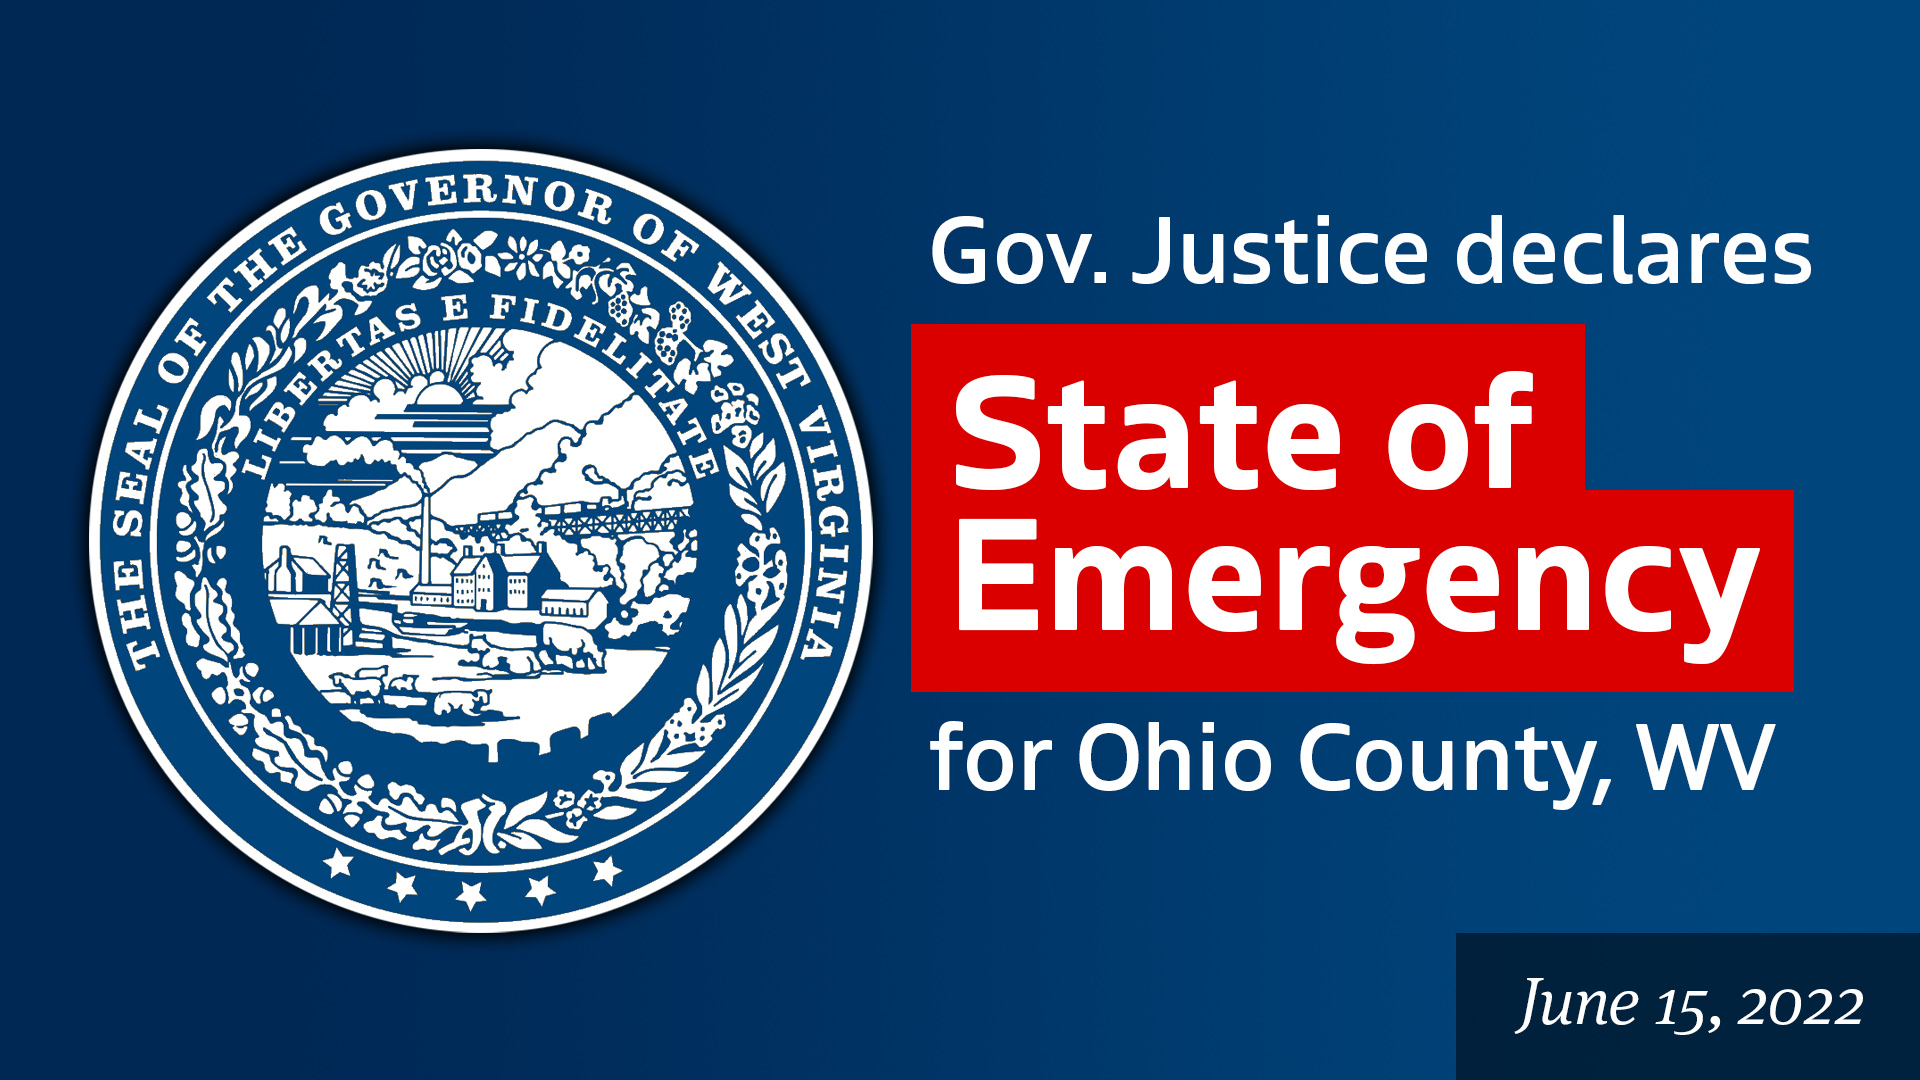 Gov. Justice declares State of Emergency for Ohio County due to severe